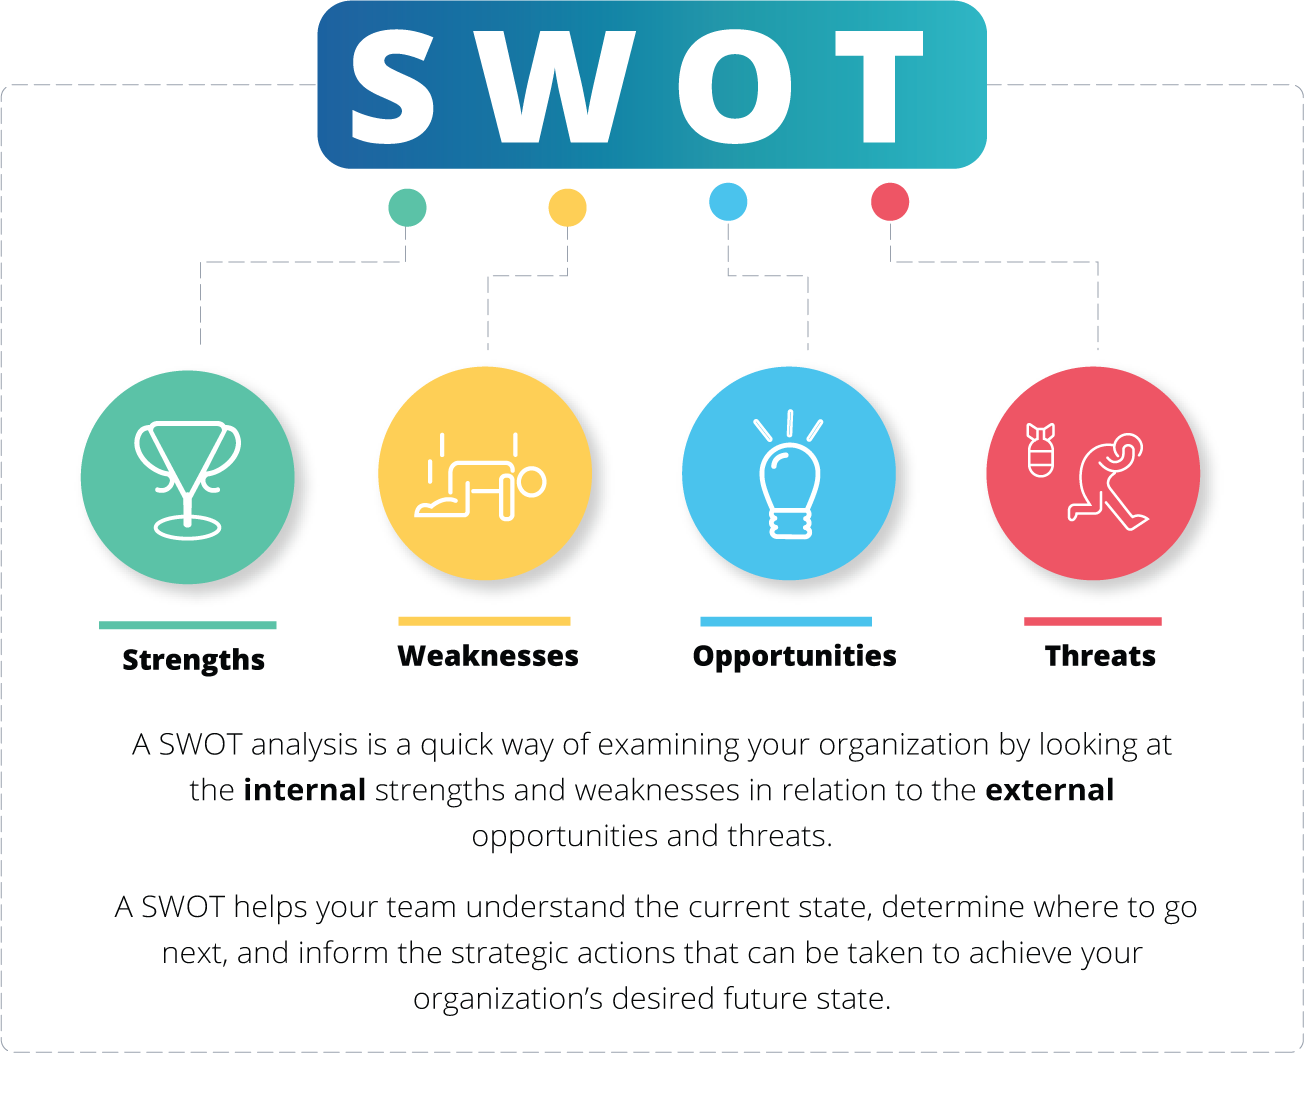 SWOT Analysis: Definition, Benefits, and Effective Implementation